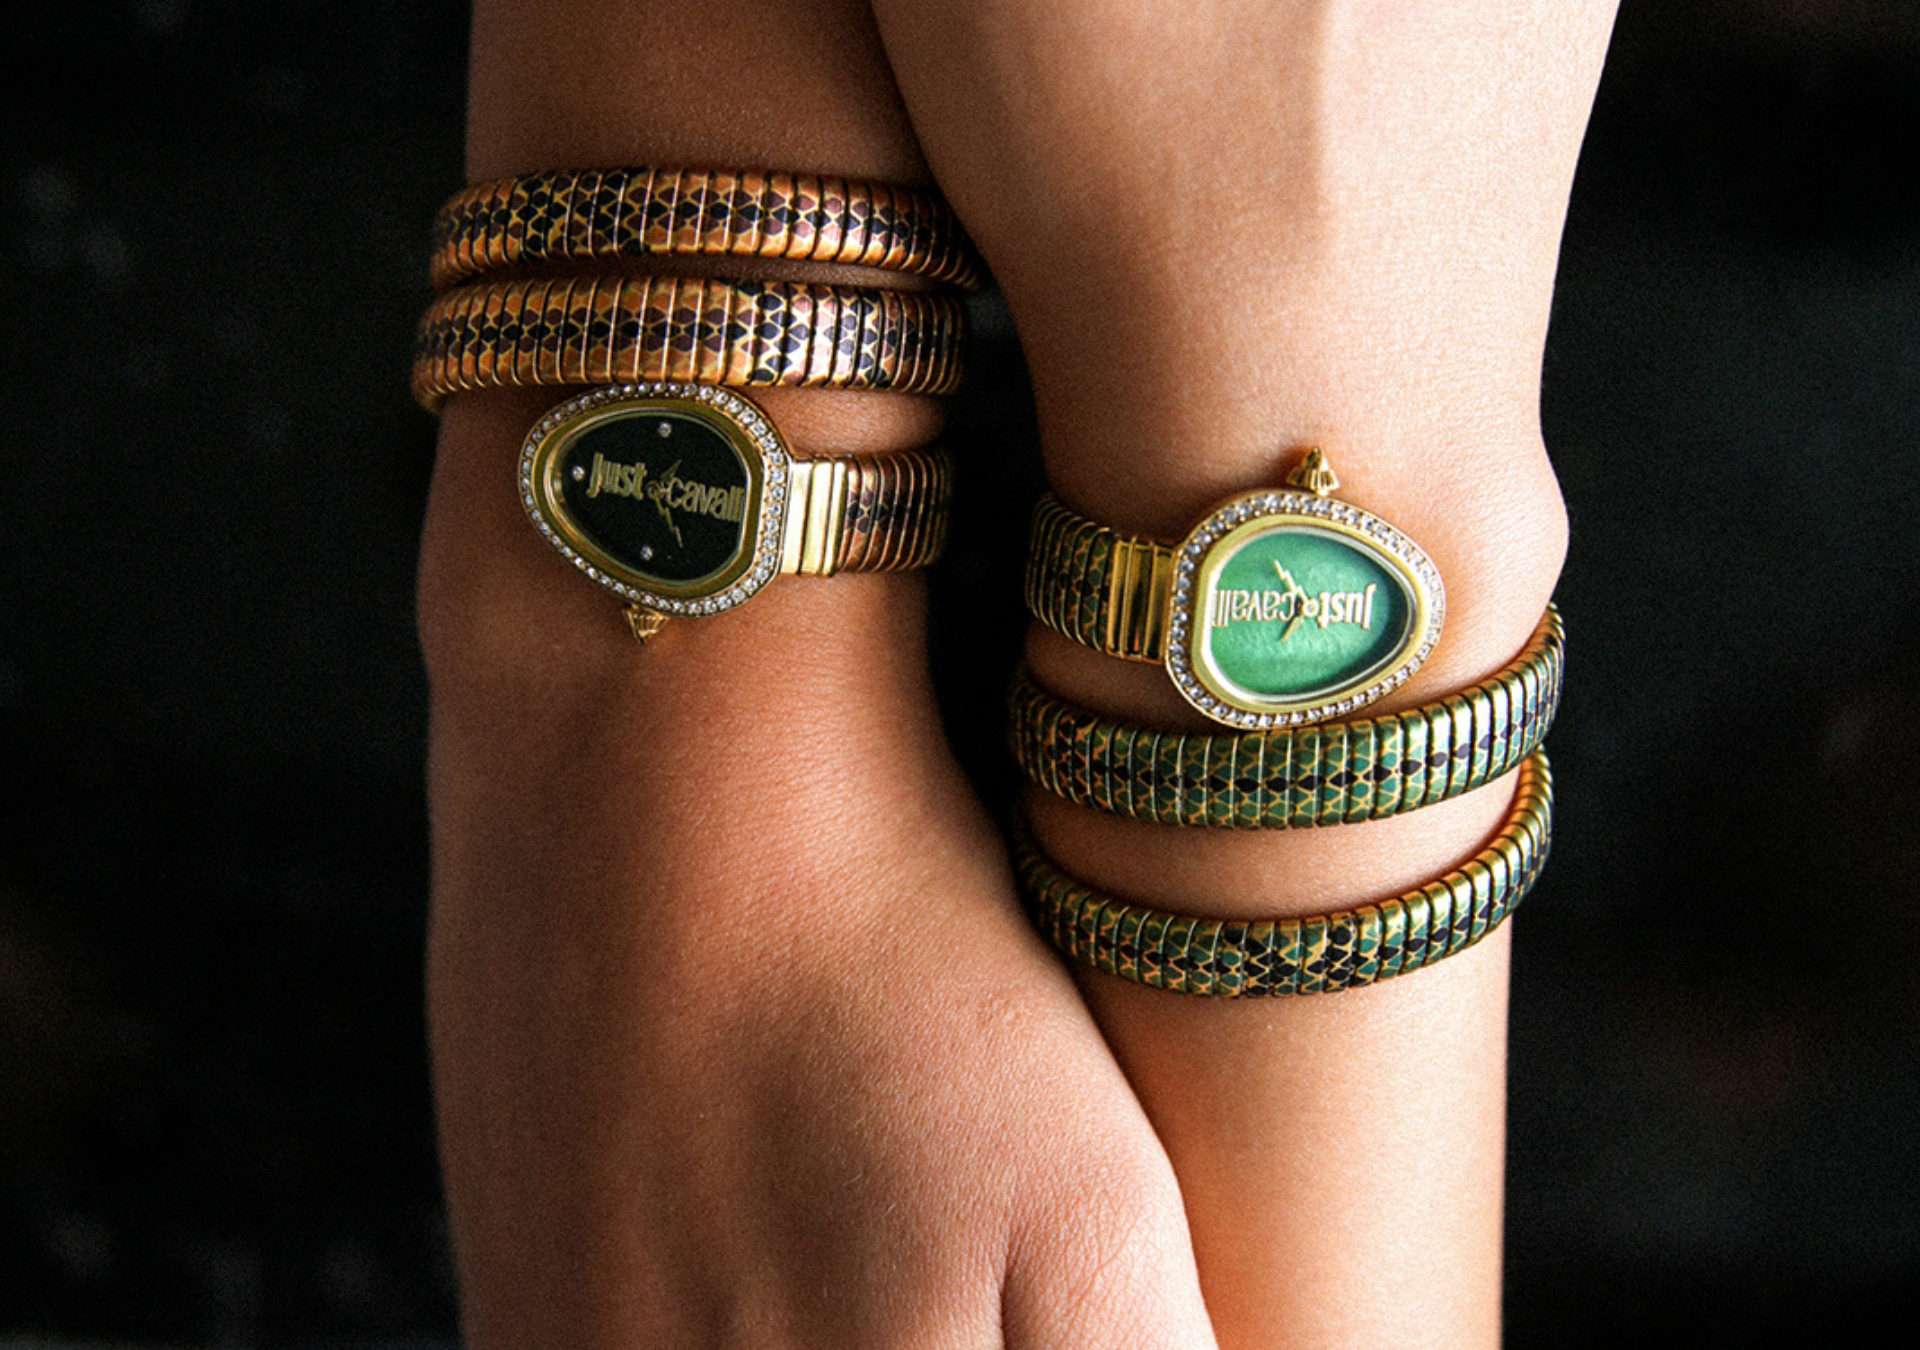 Intriguing collection of snake-inspired watches from Just Cavalli